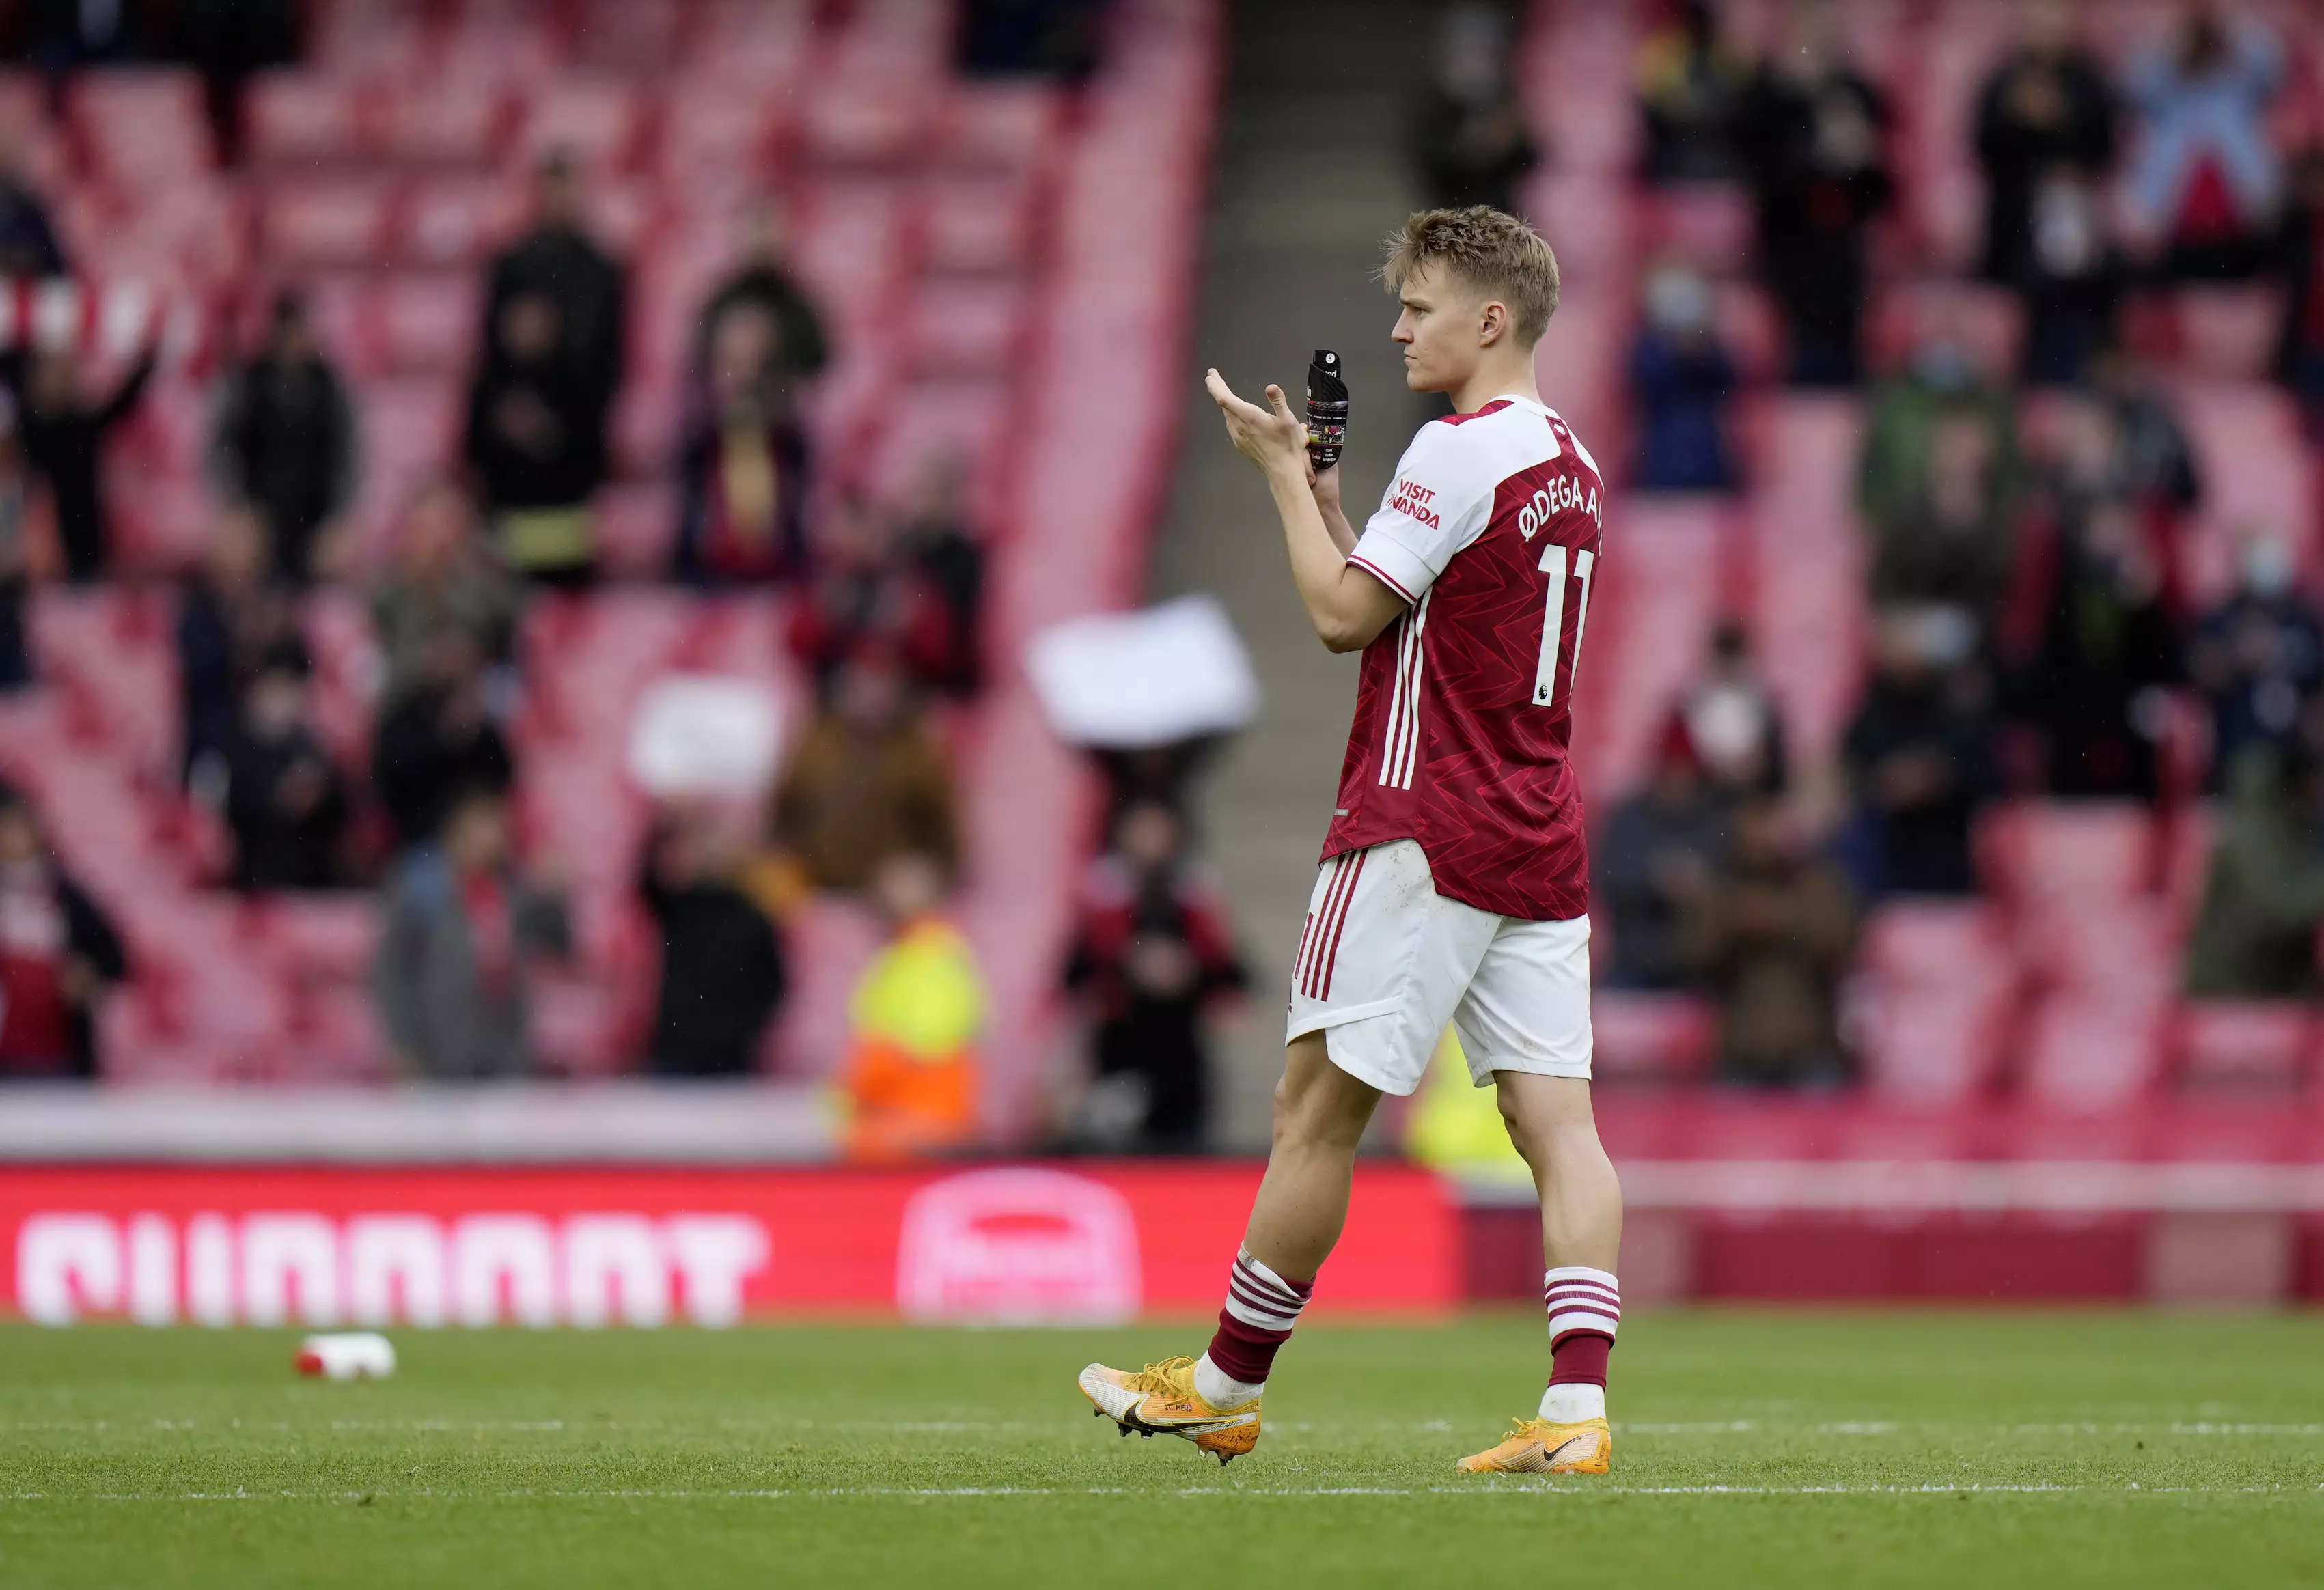 Odegaard says goodbye to the Arsenal fans. Image: PA Images